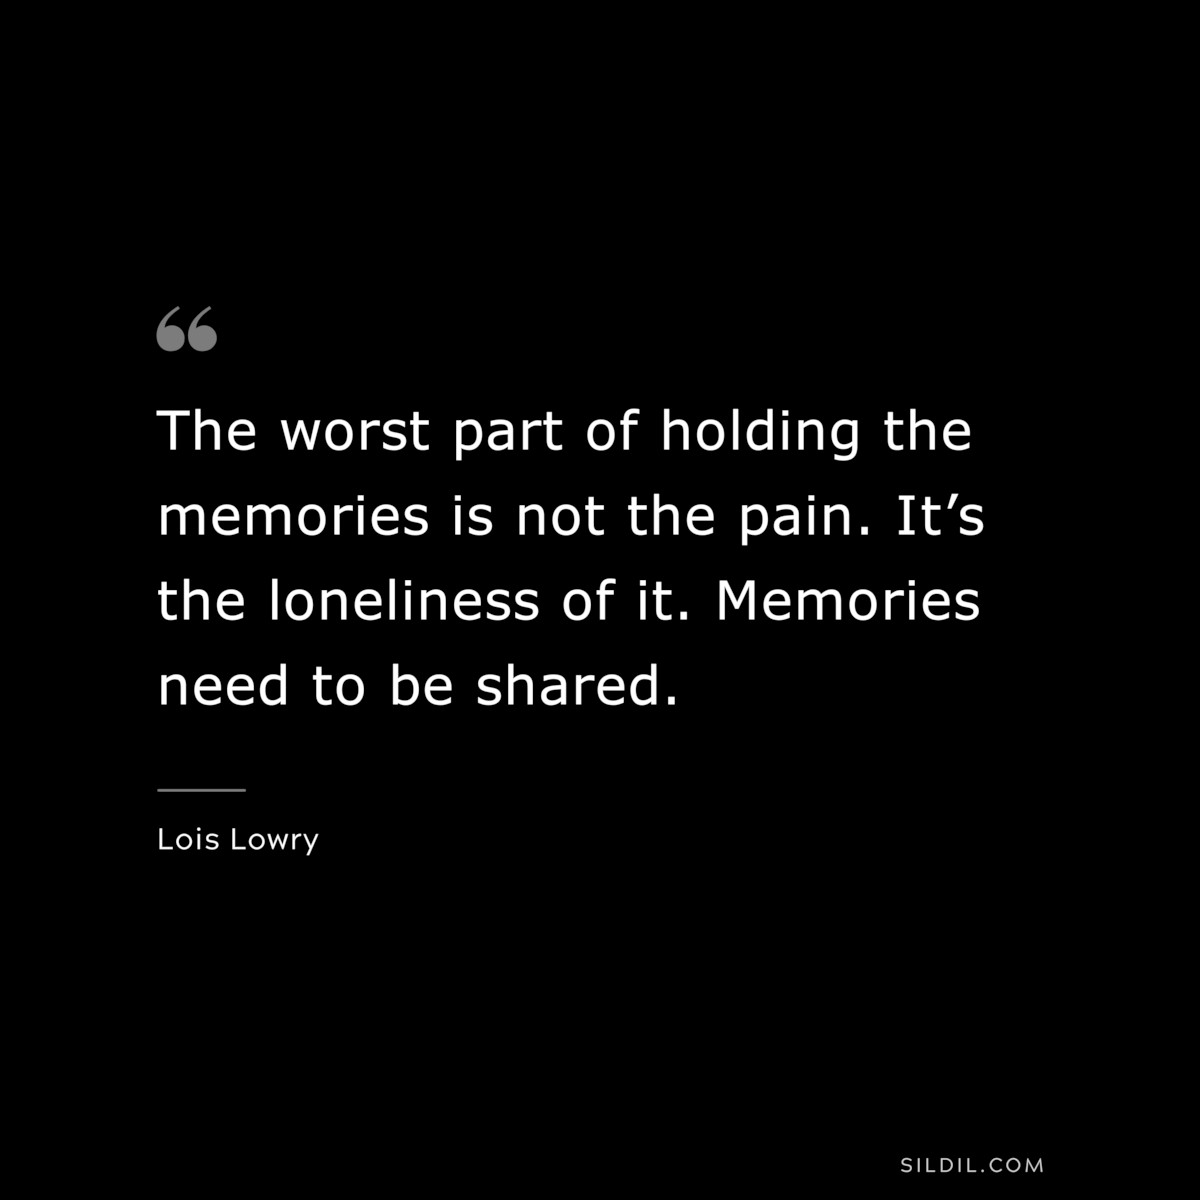 The worst part of holding the memories is not the pain. It’s the loneliness of it. Memories need to be shared. ― Lois Lowry